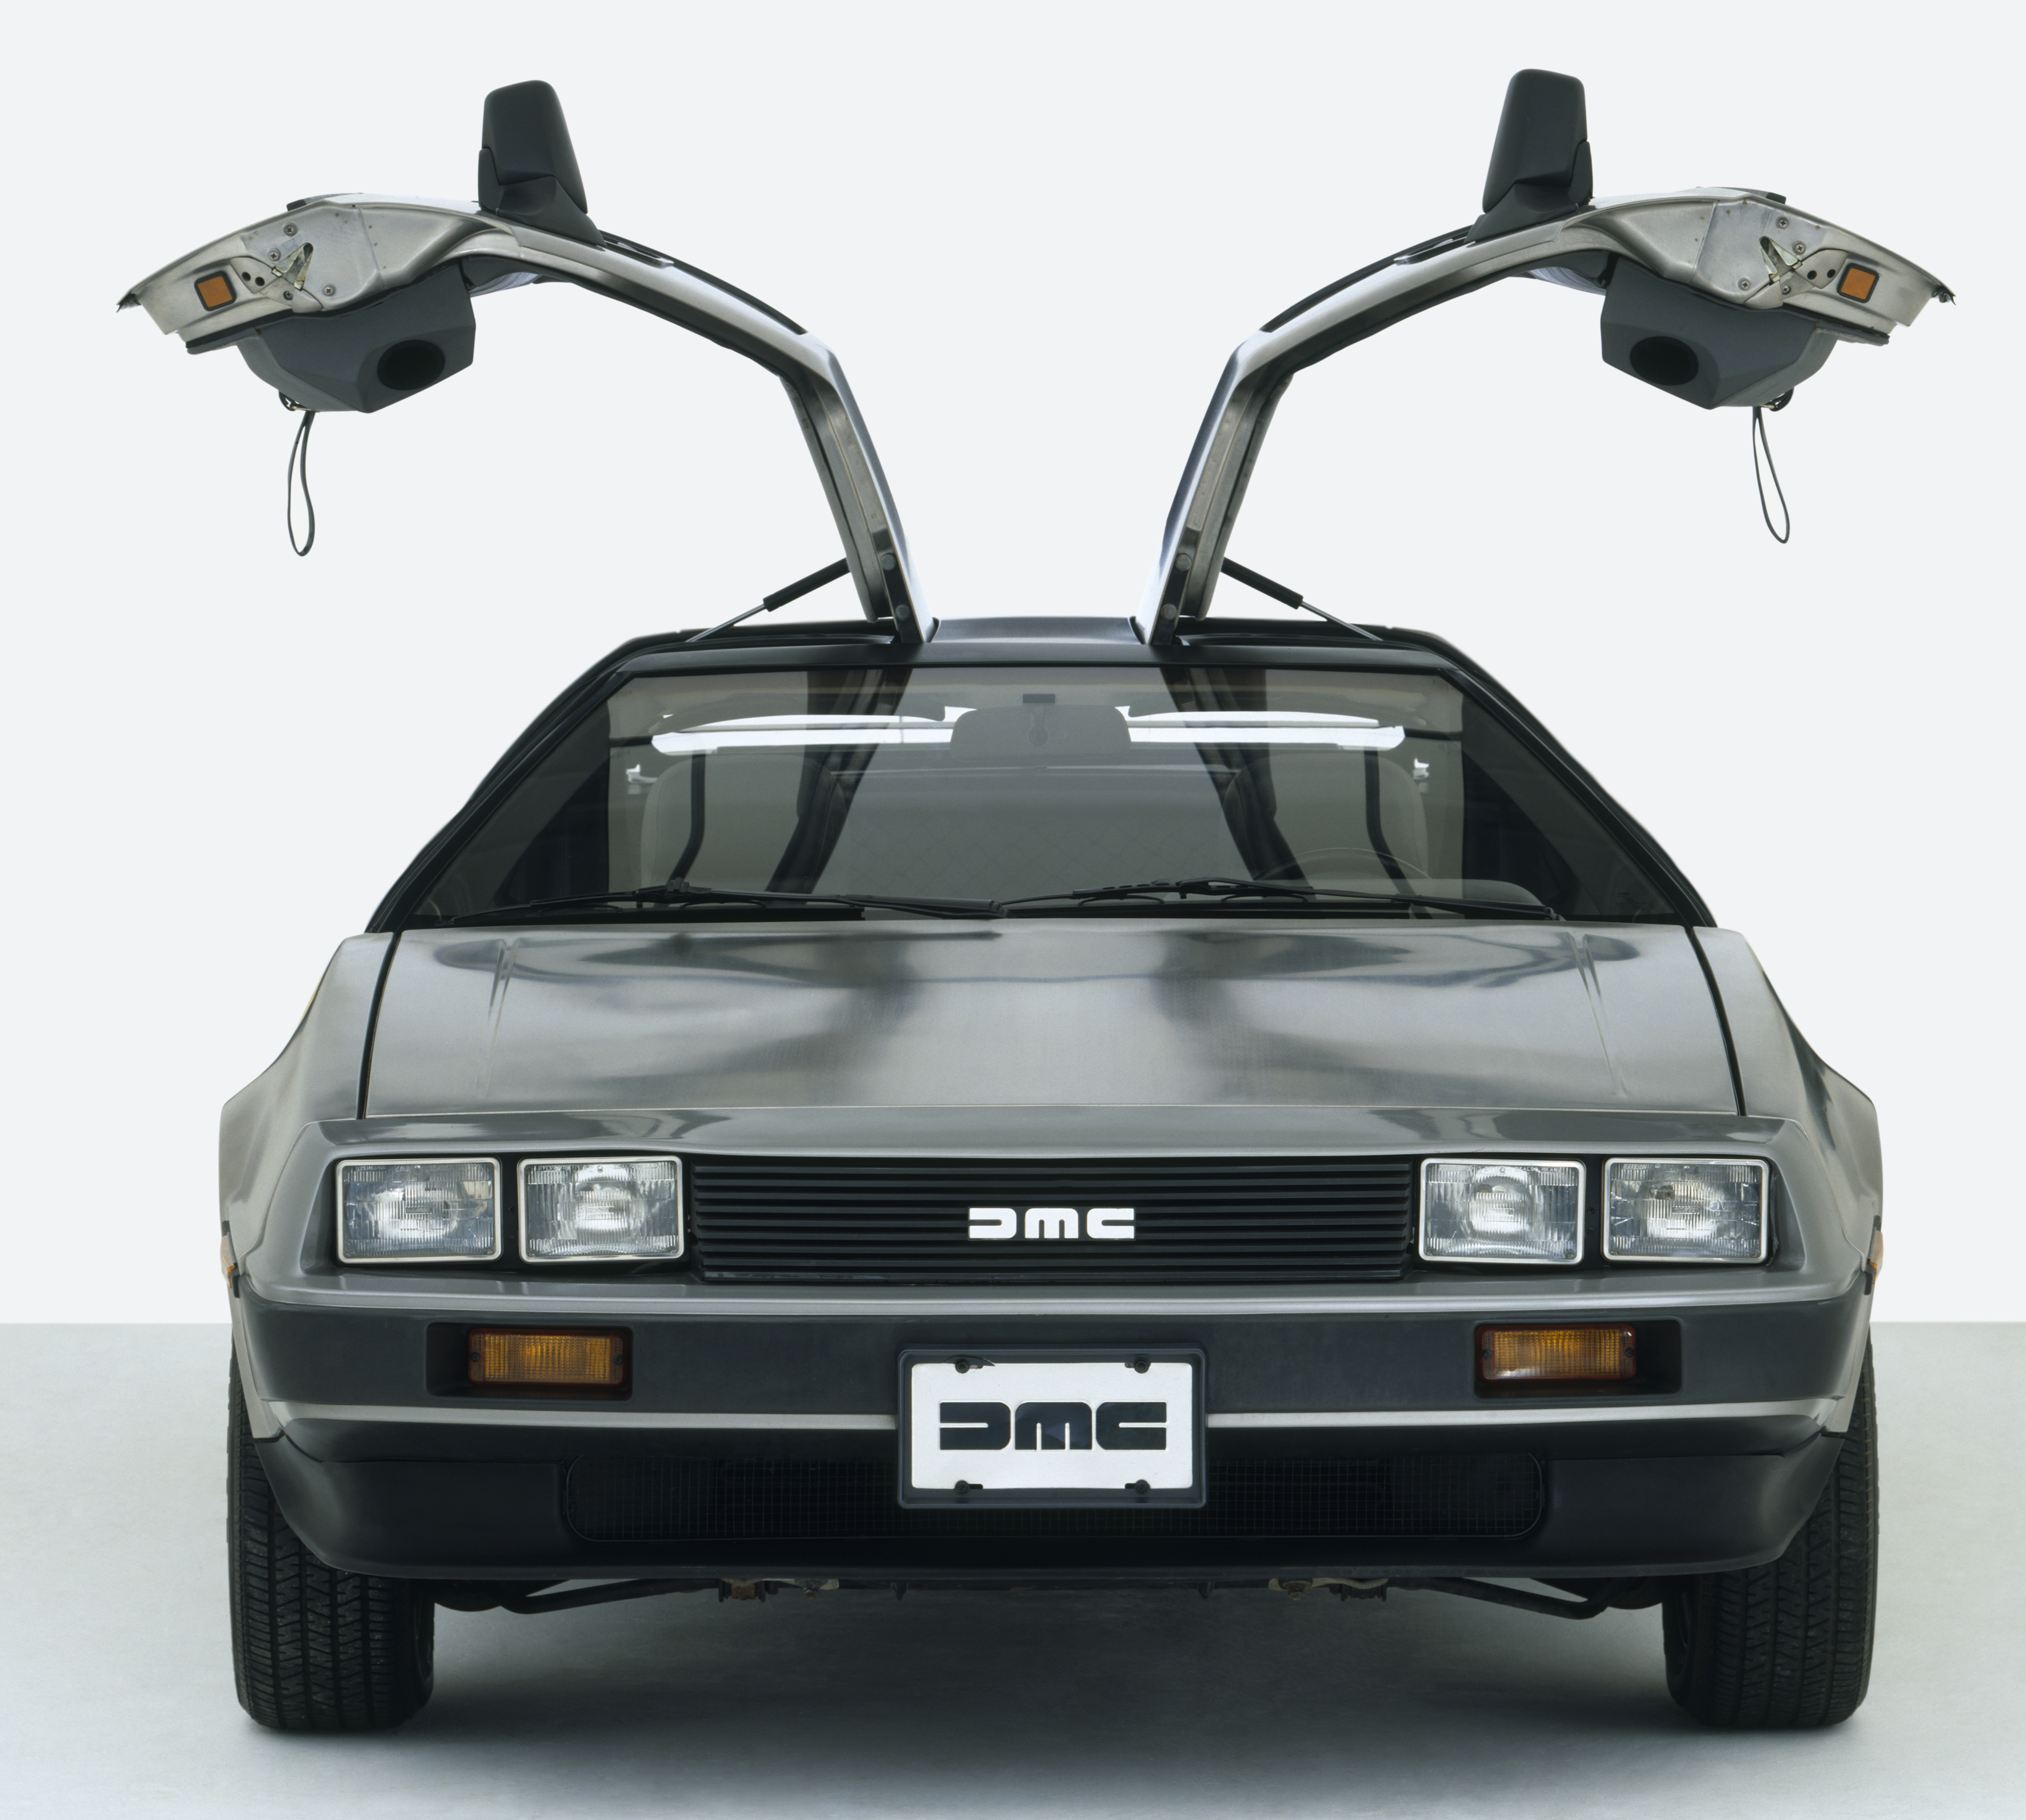 DeLorean DMC 12 with gullwing doors, 1979-82 (Getty Images)